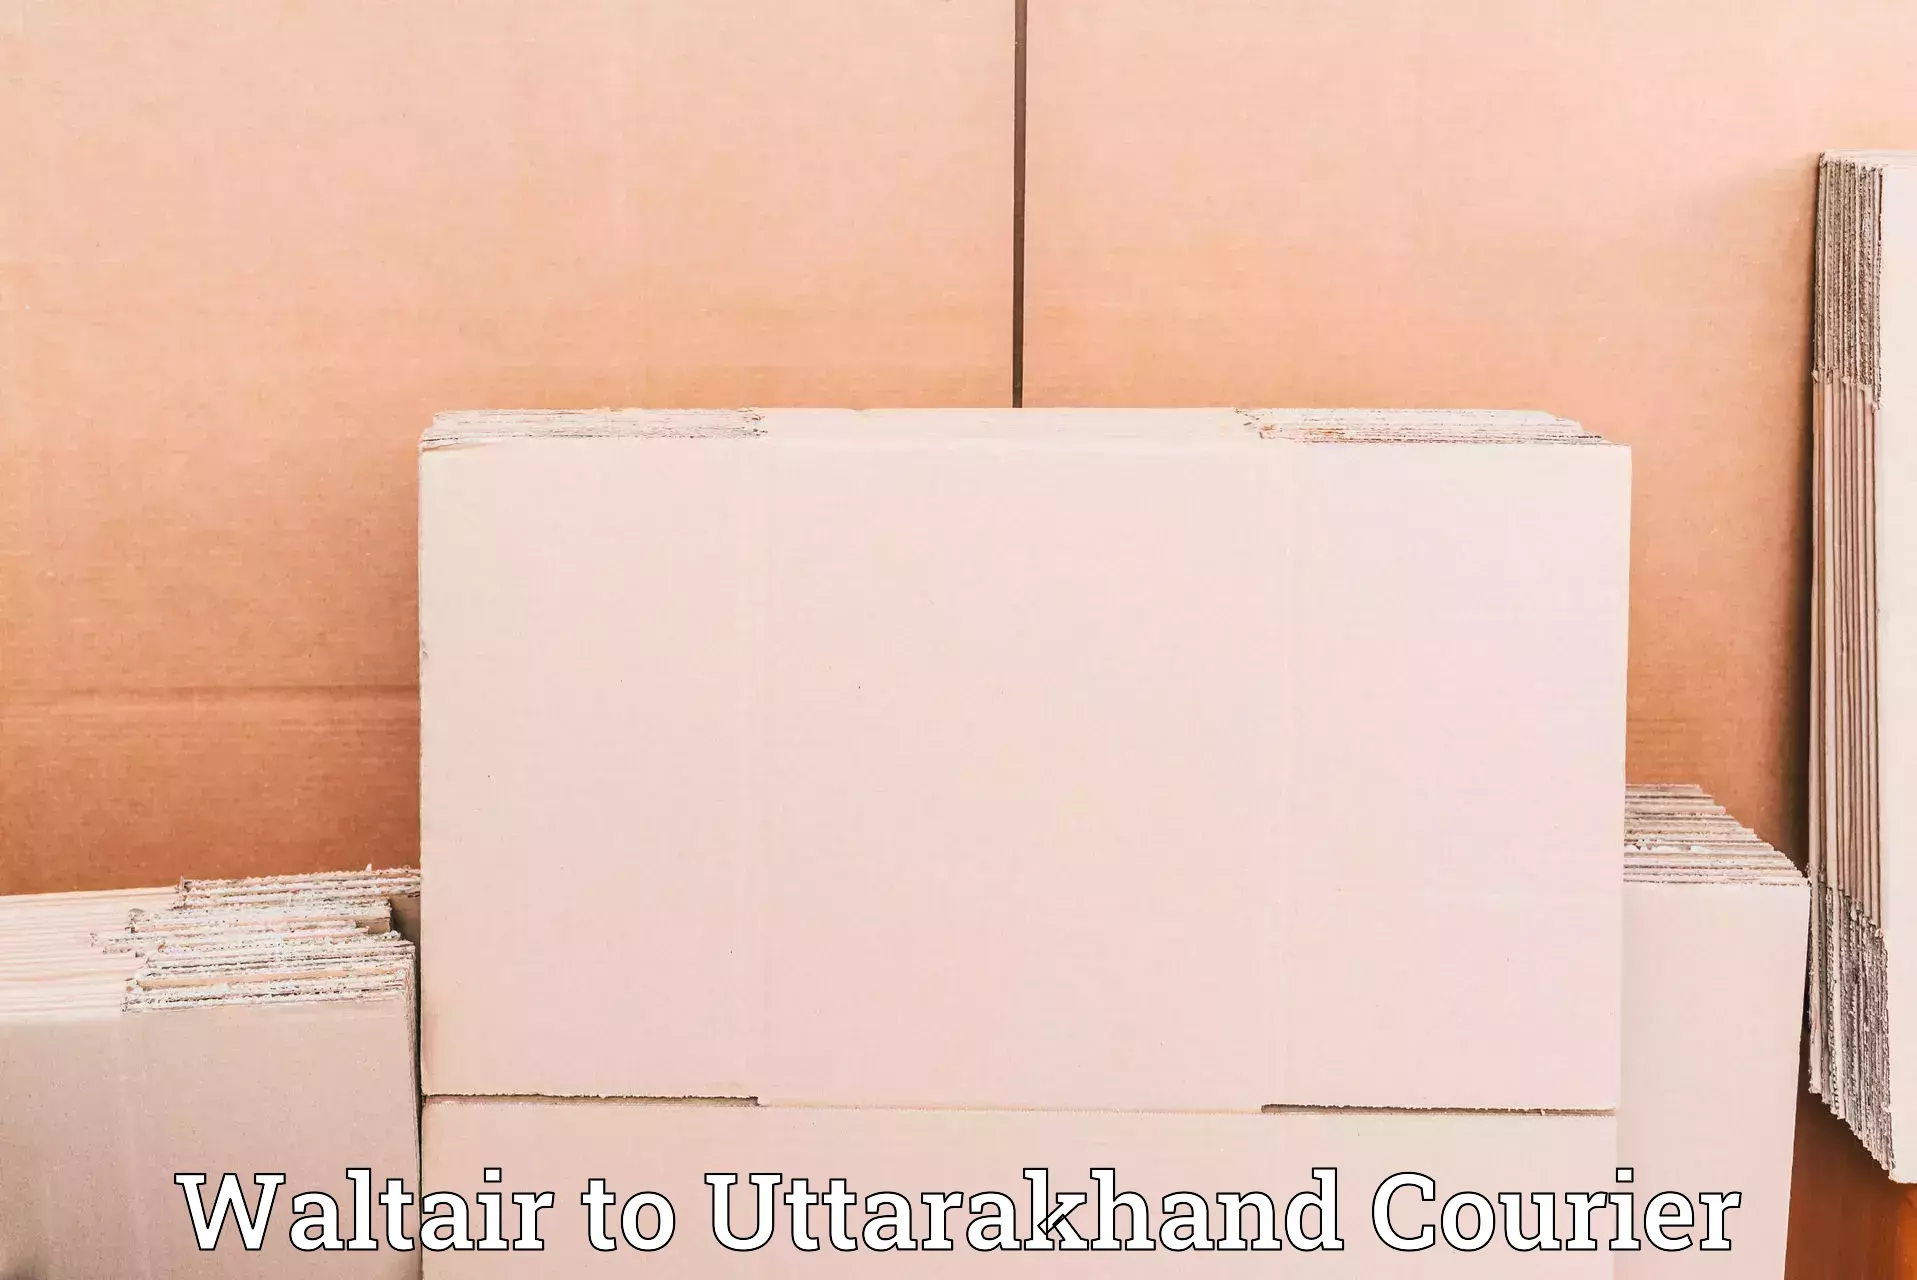 Courier service partnerships Waltair to Haridwar